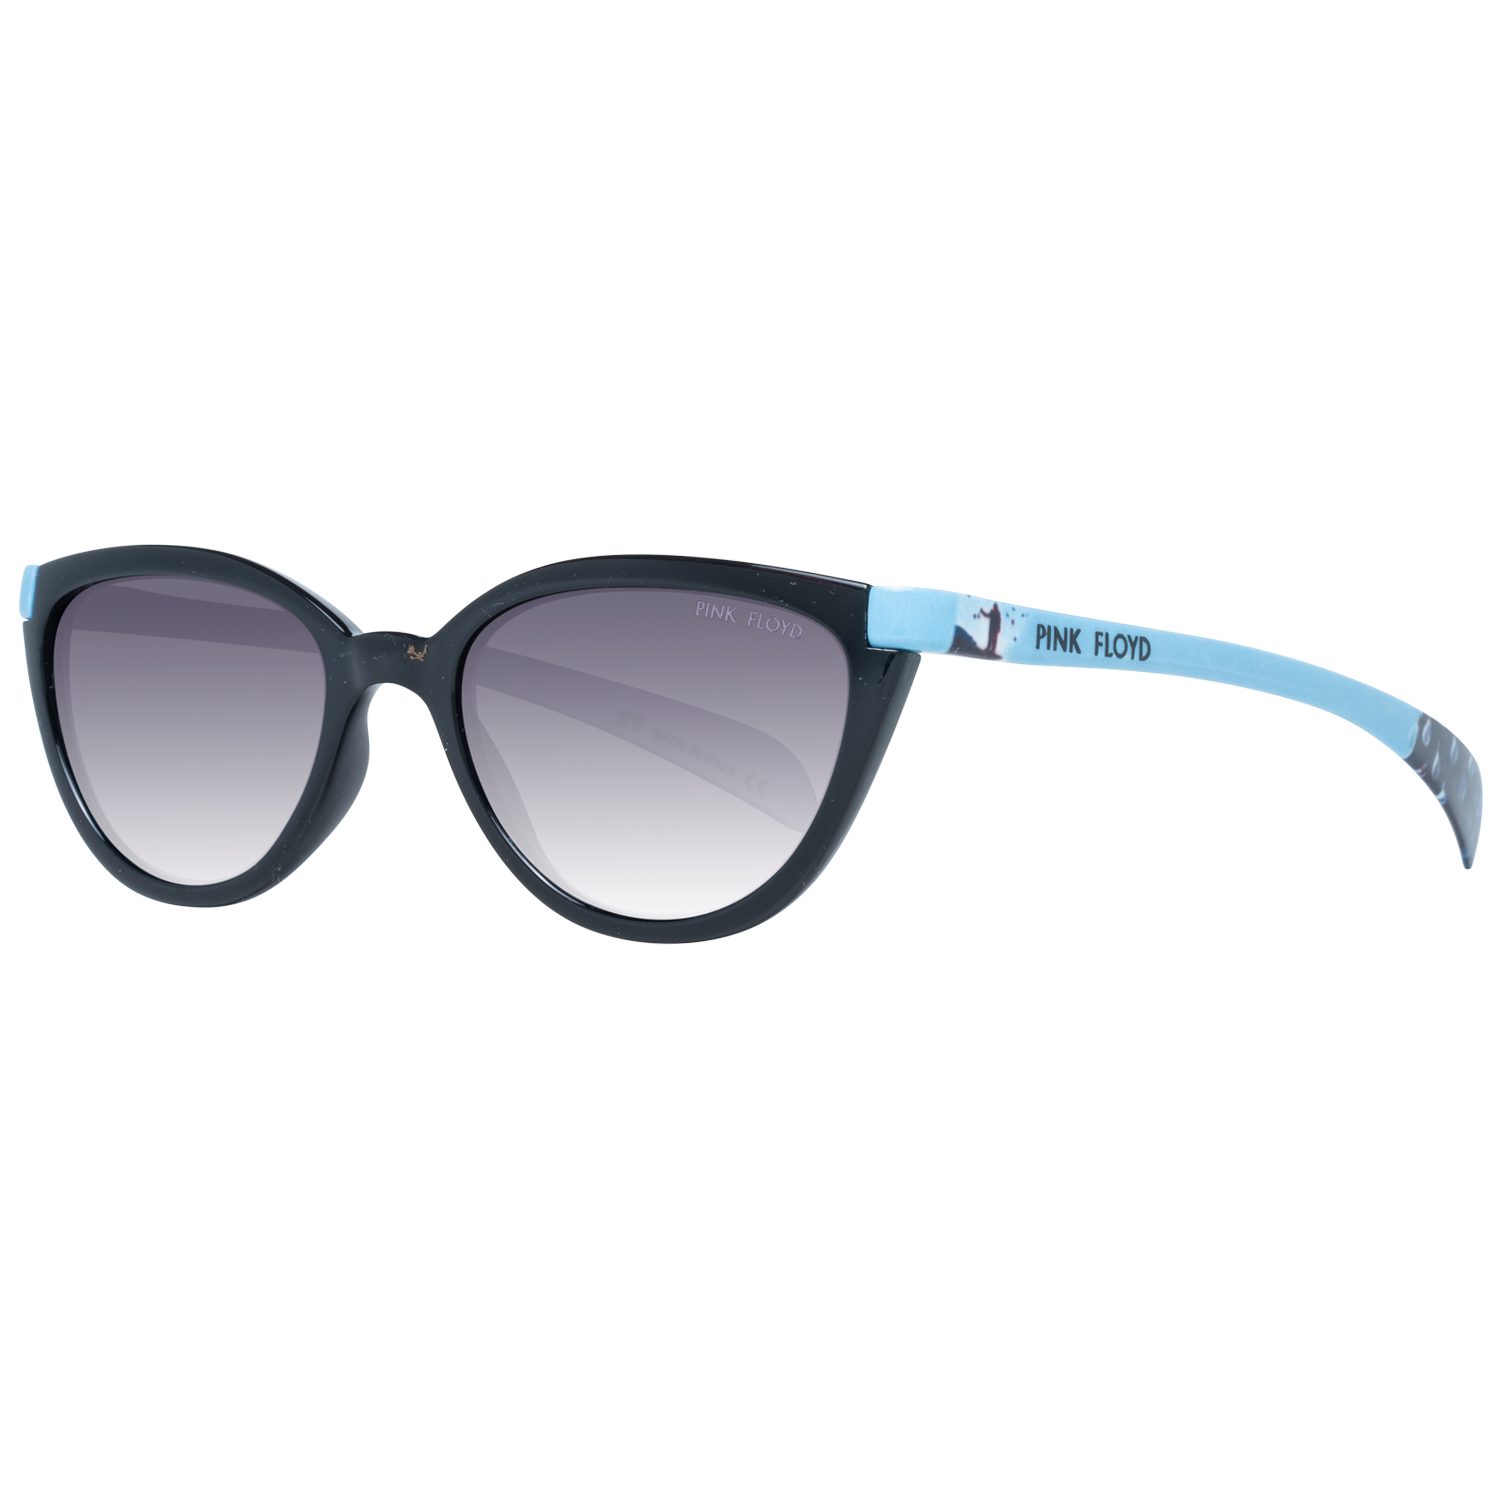 Try Cover Change Sonnenbrille TS501 5001